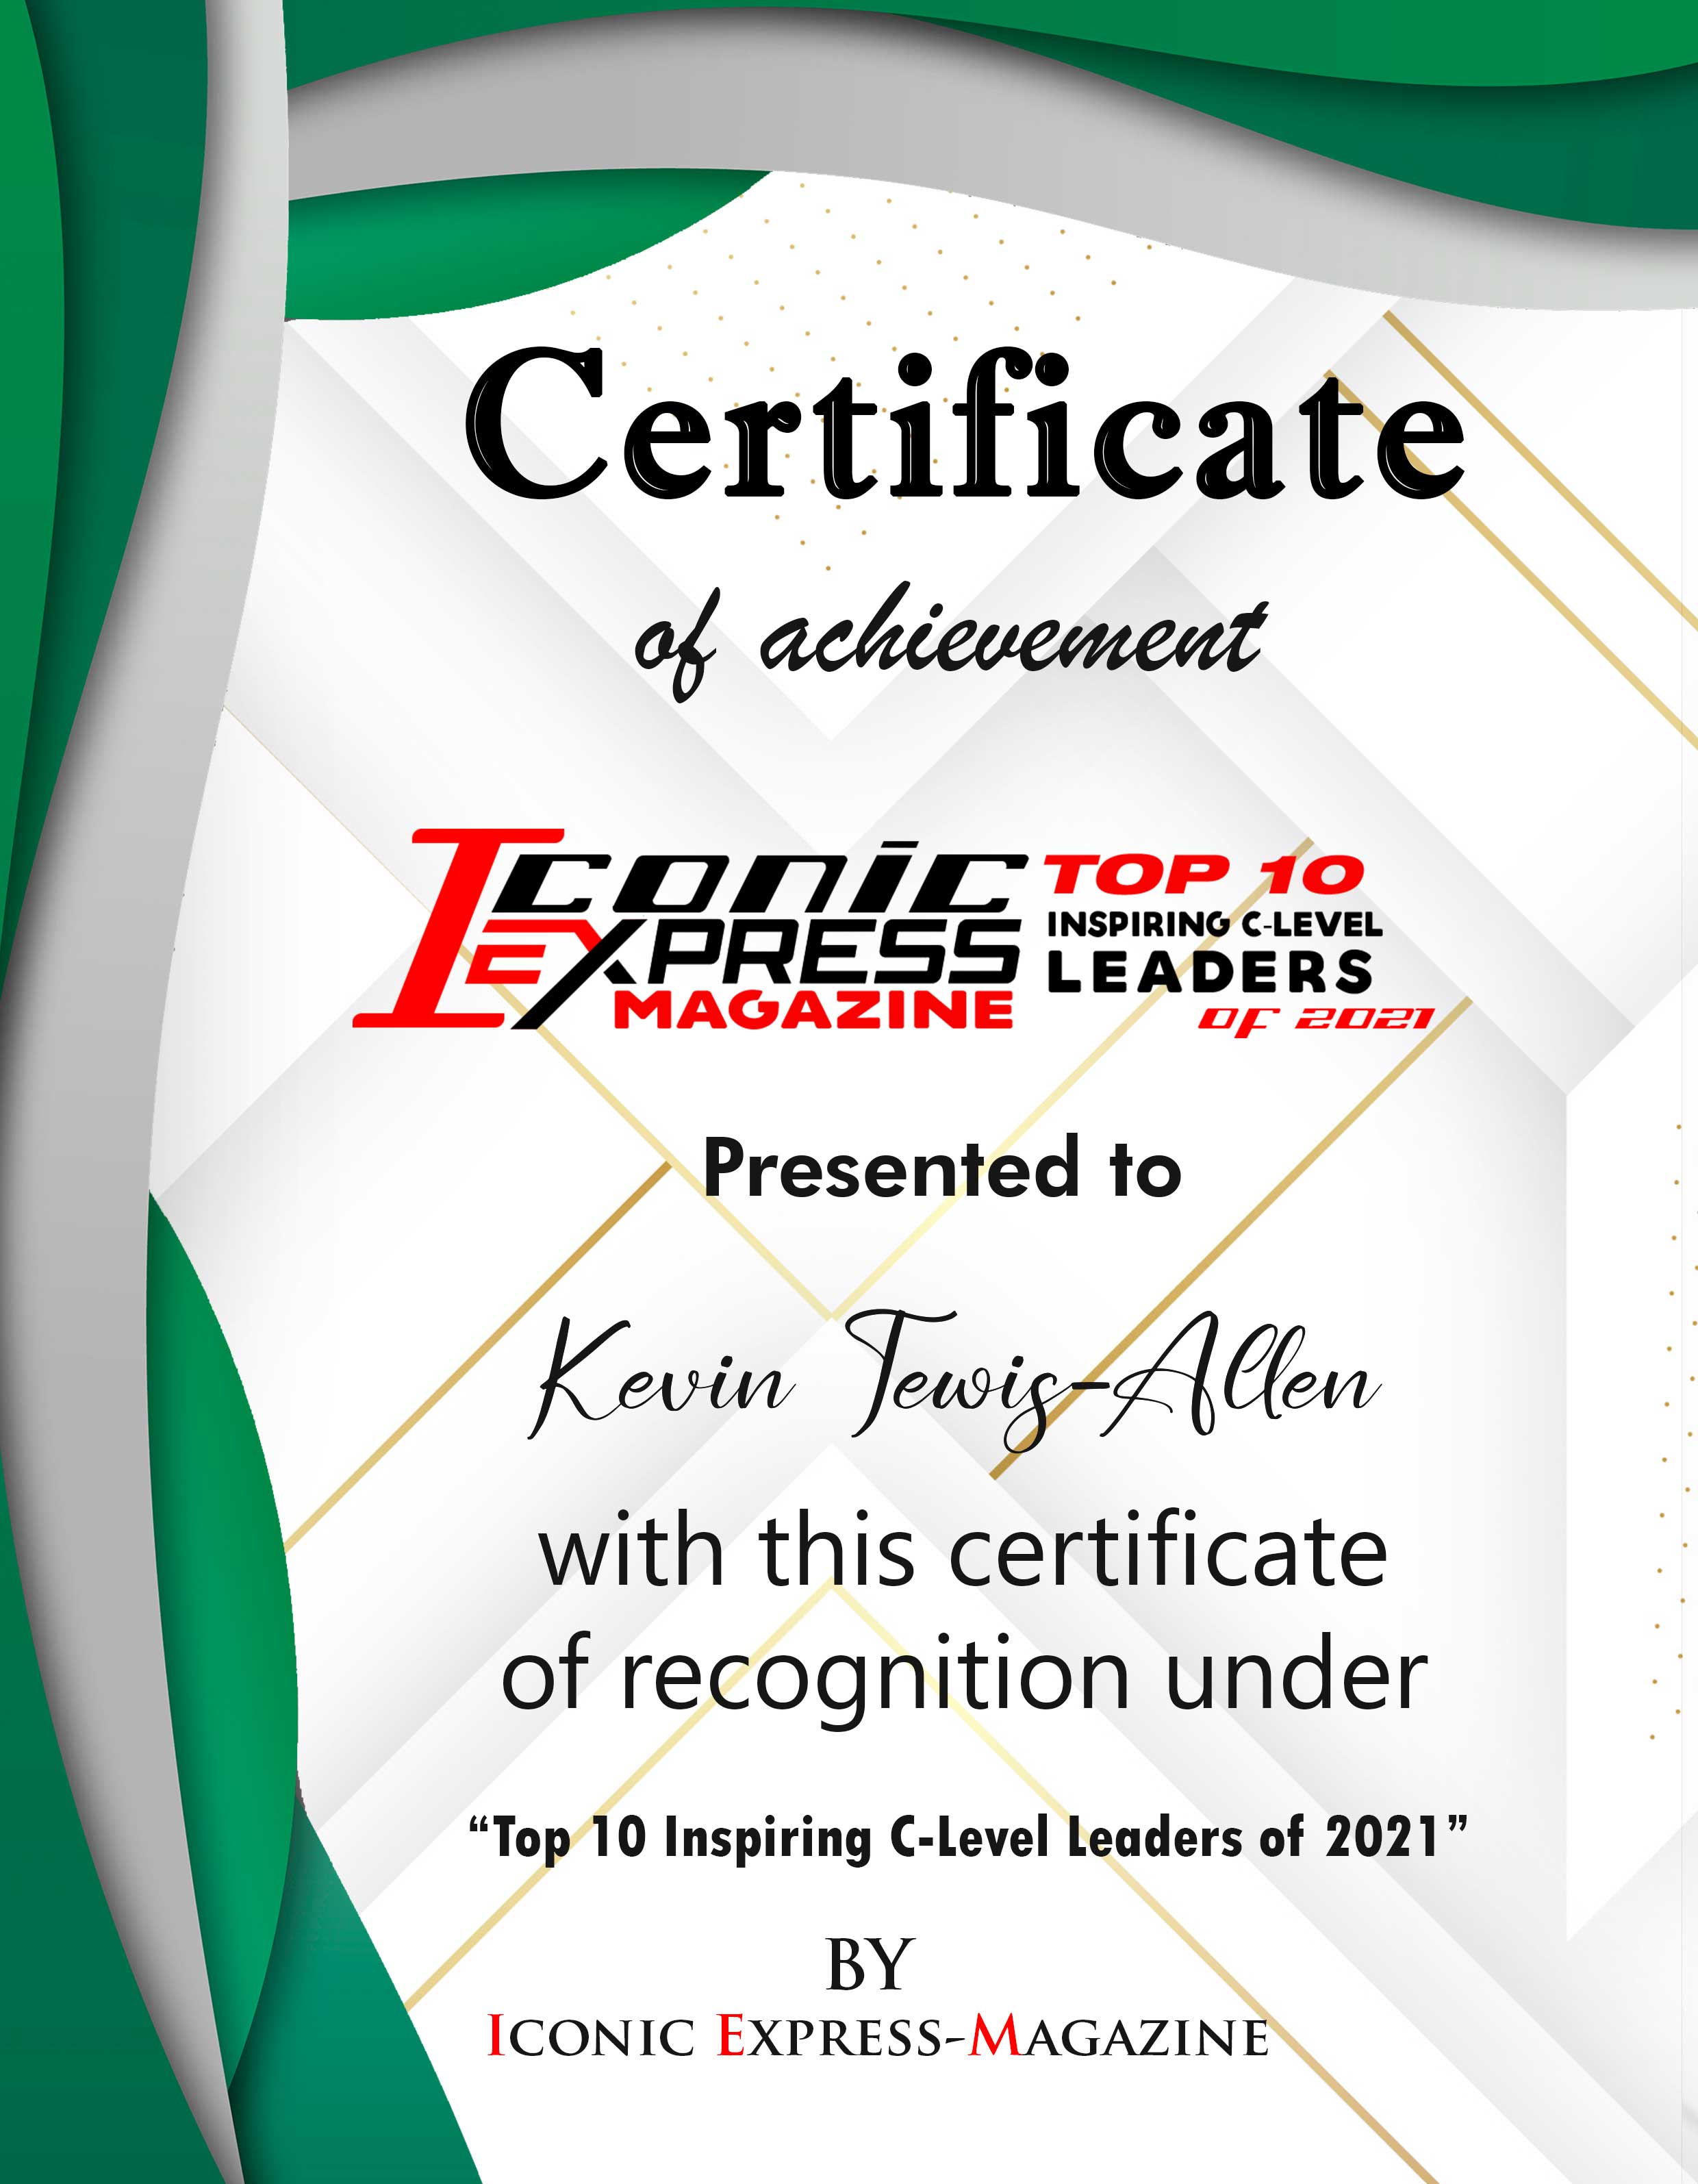 Kevin Tewis-Allen CMO of Street Soccer Foundation Certificate